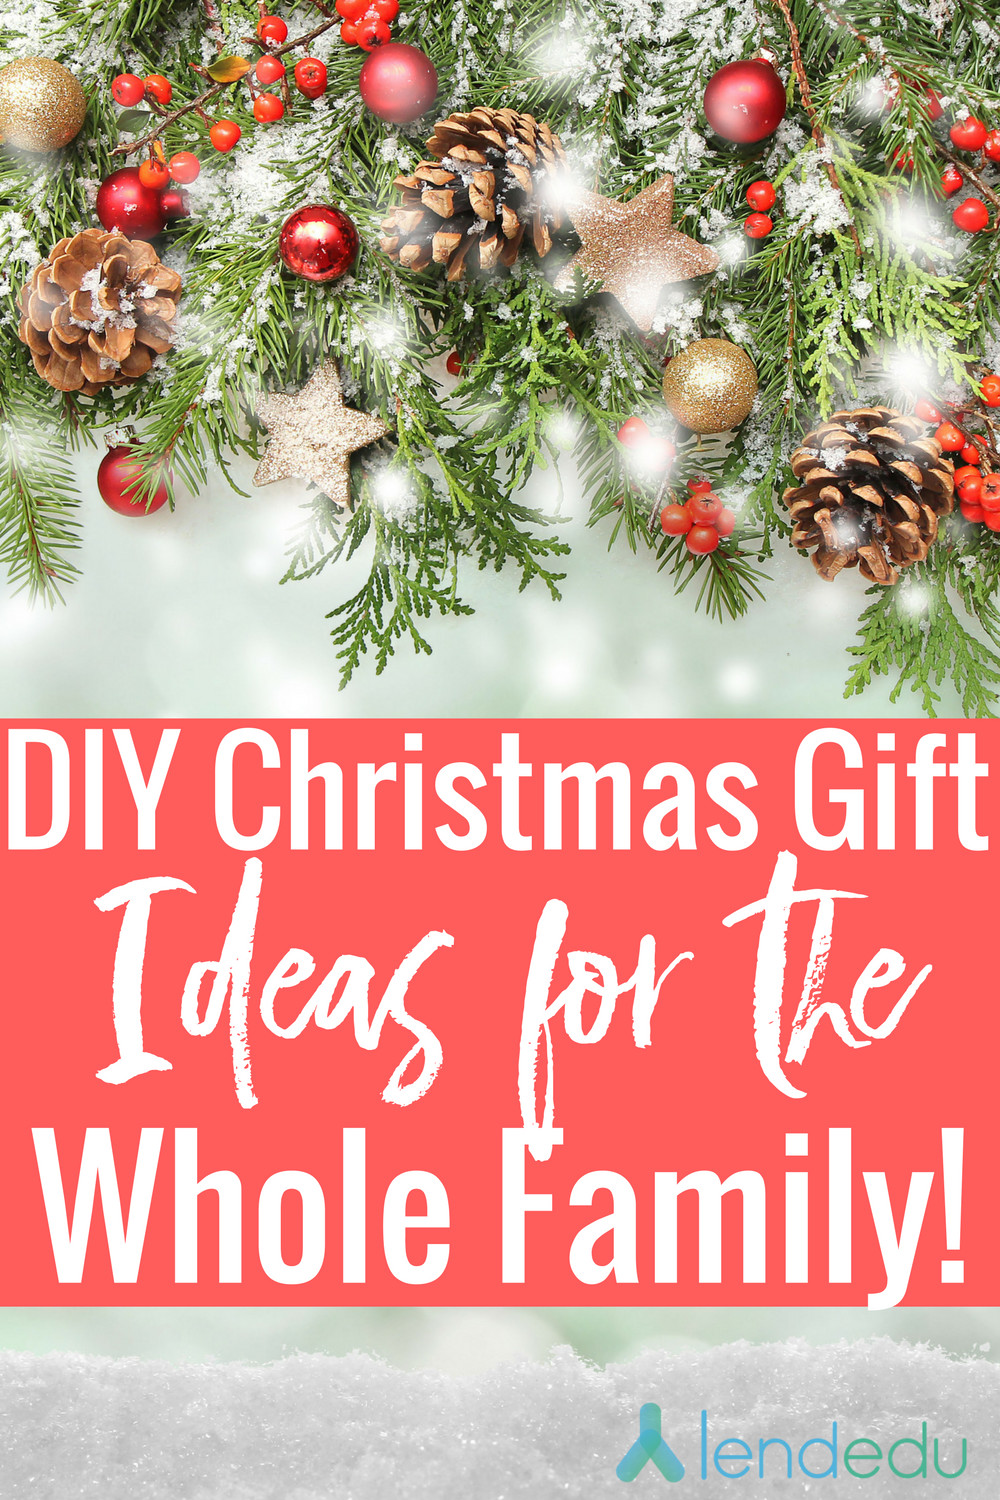 Best 24 Diy Christmas Gifts for Family  Home, Family, Style and Art Ideas